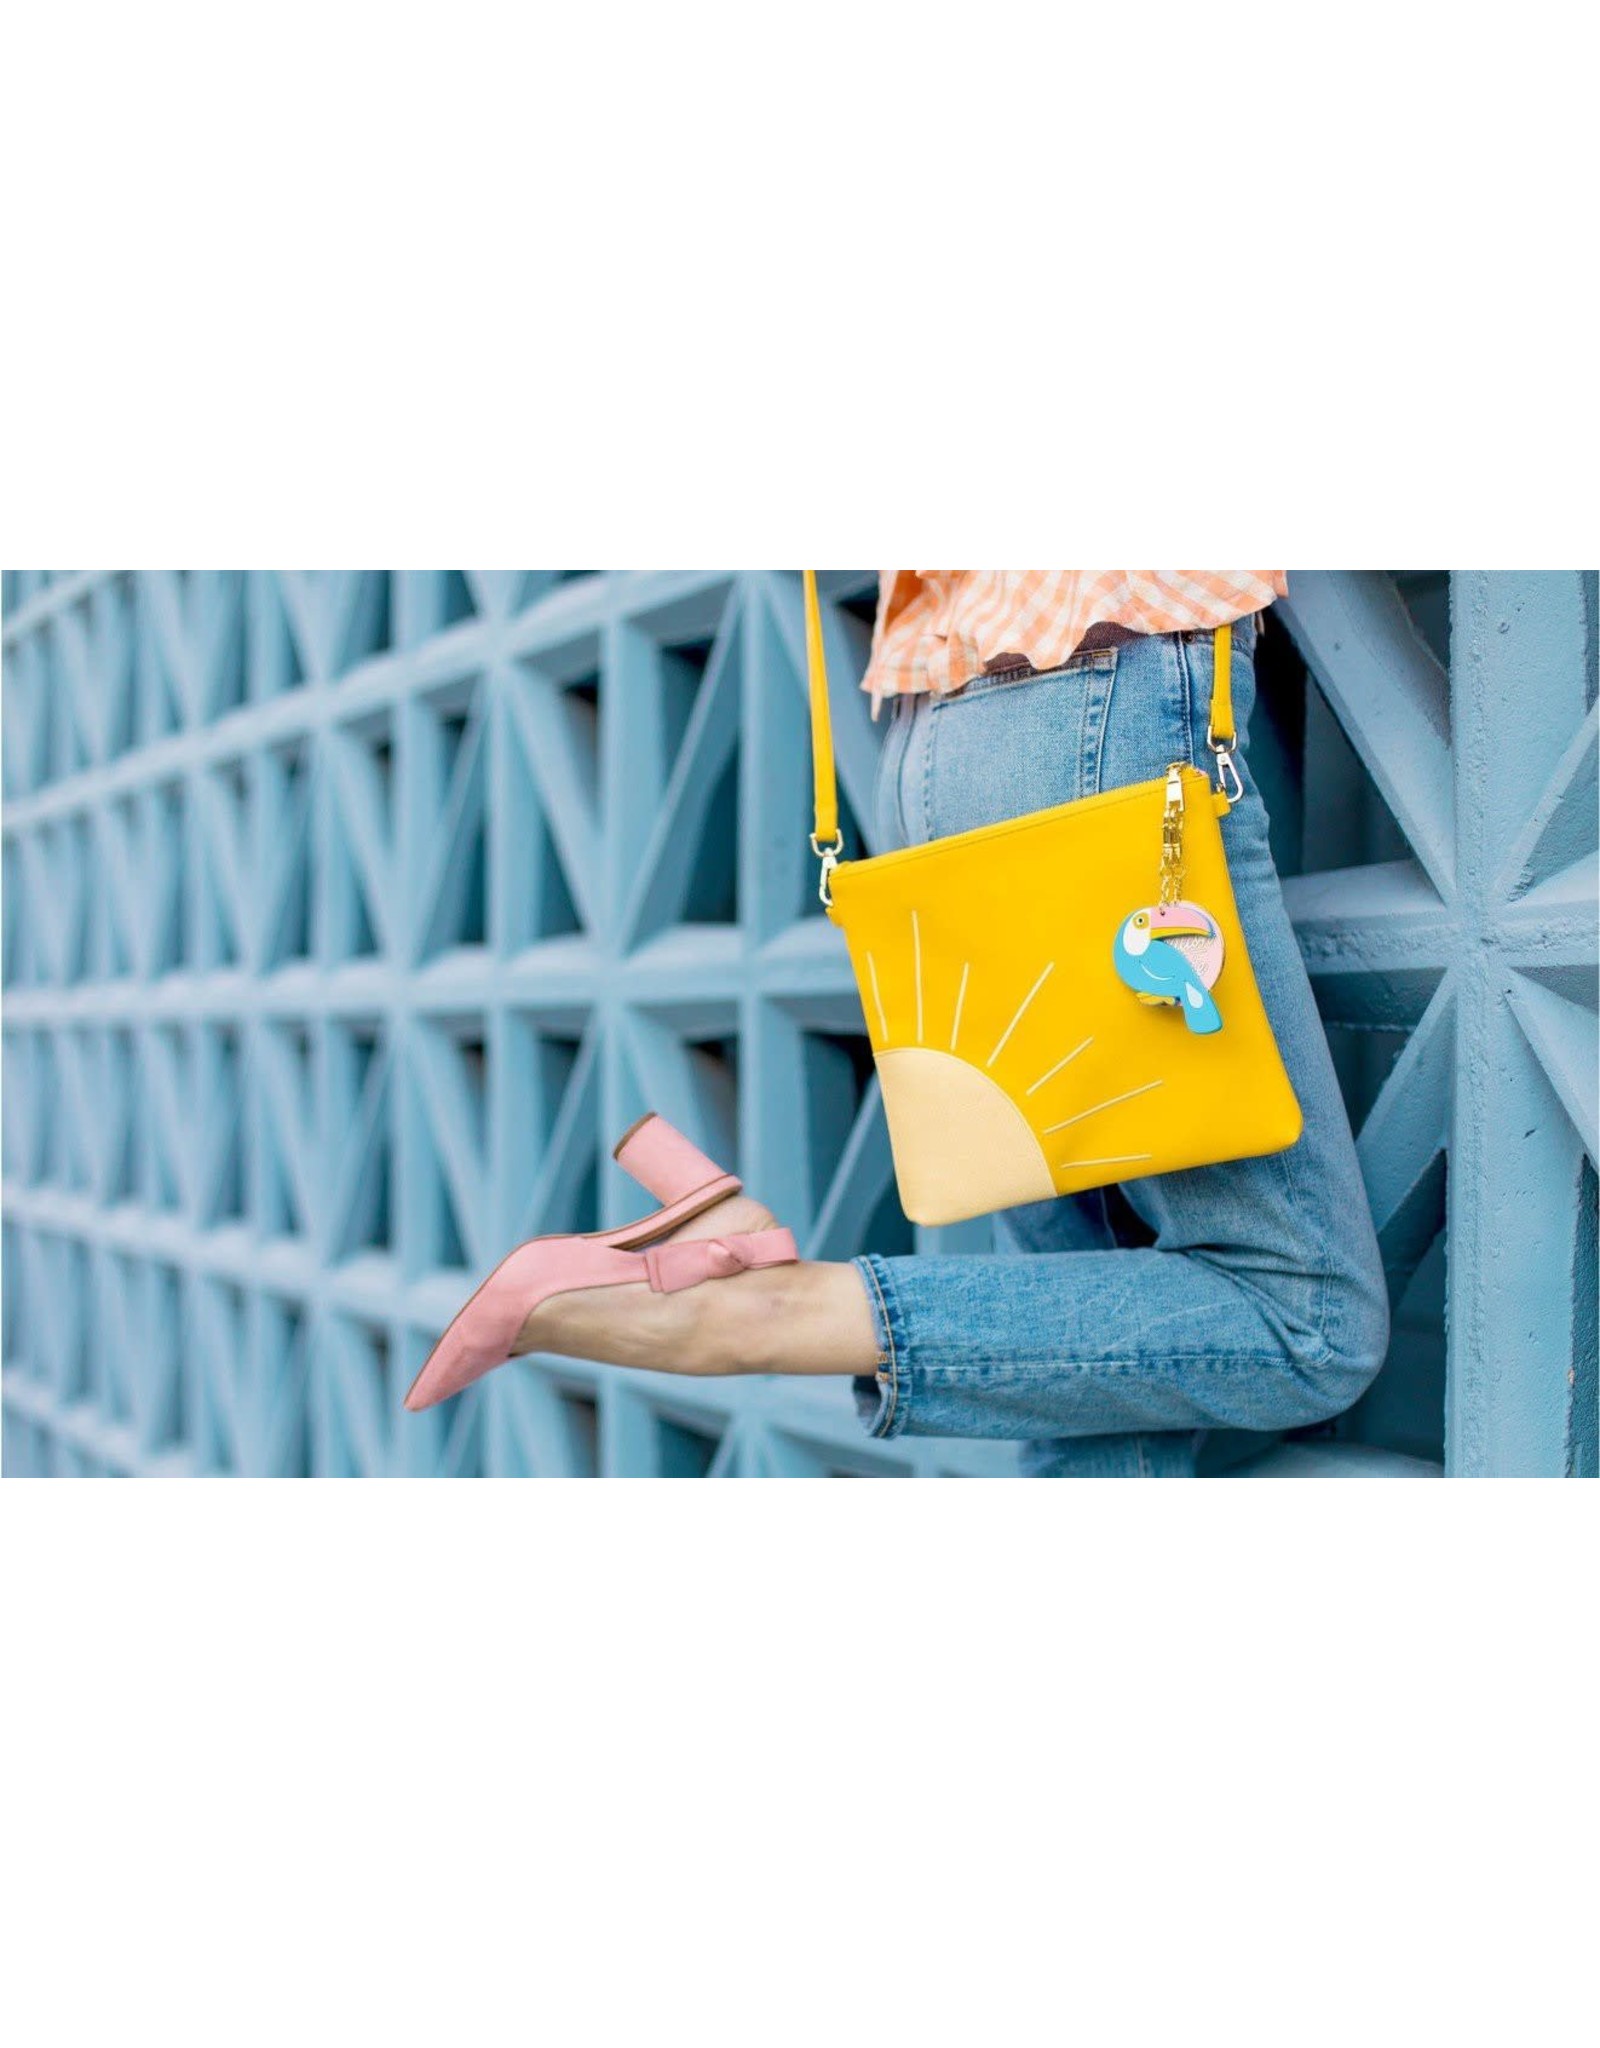 Can't Clutch This Sunshine Clutch